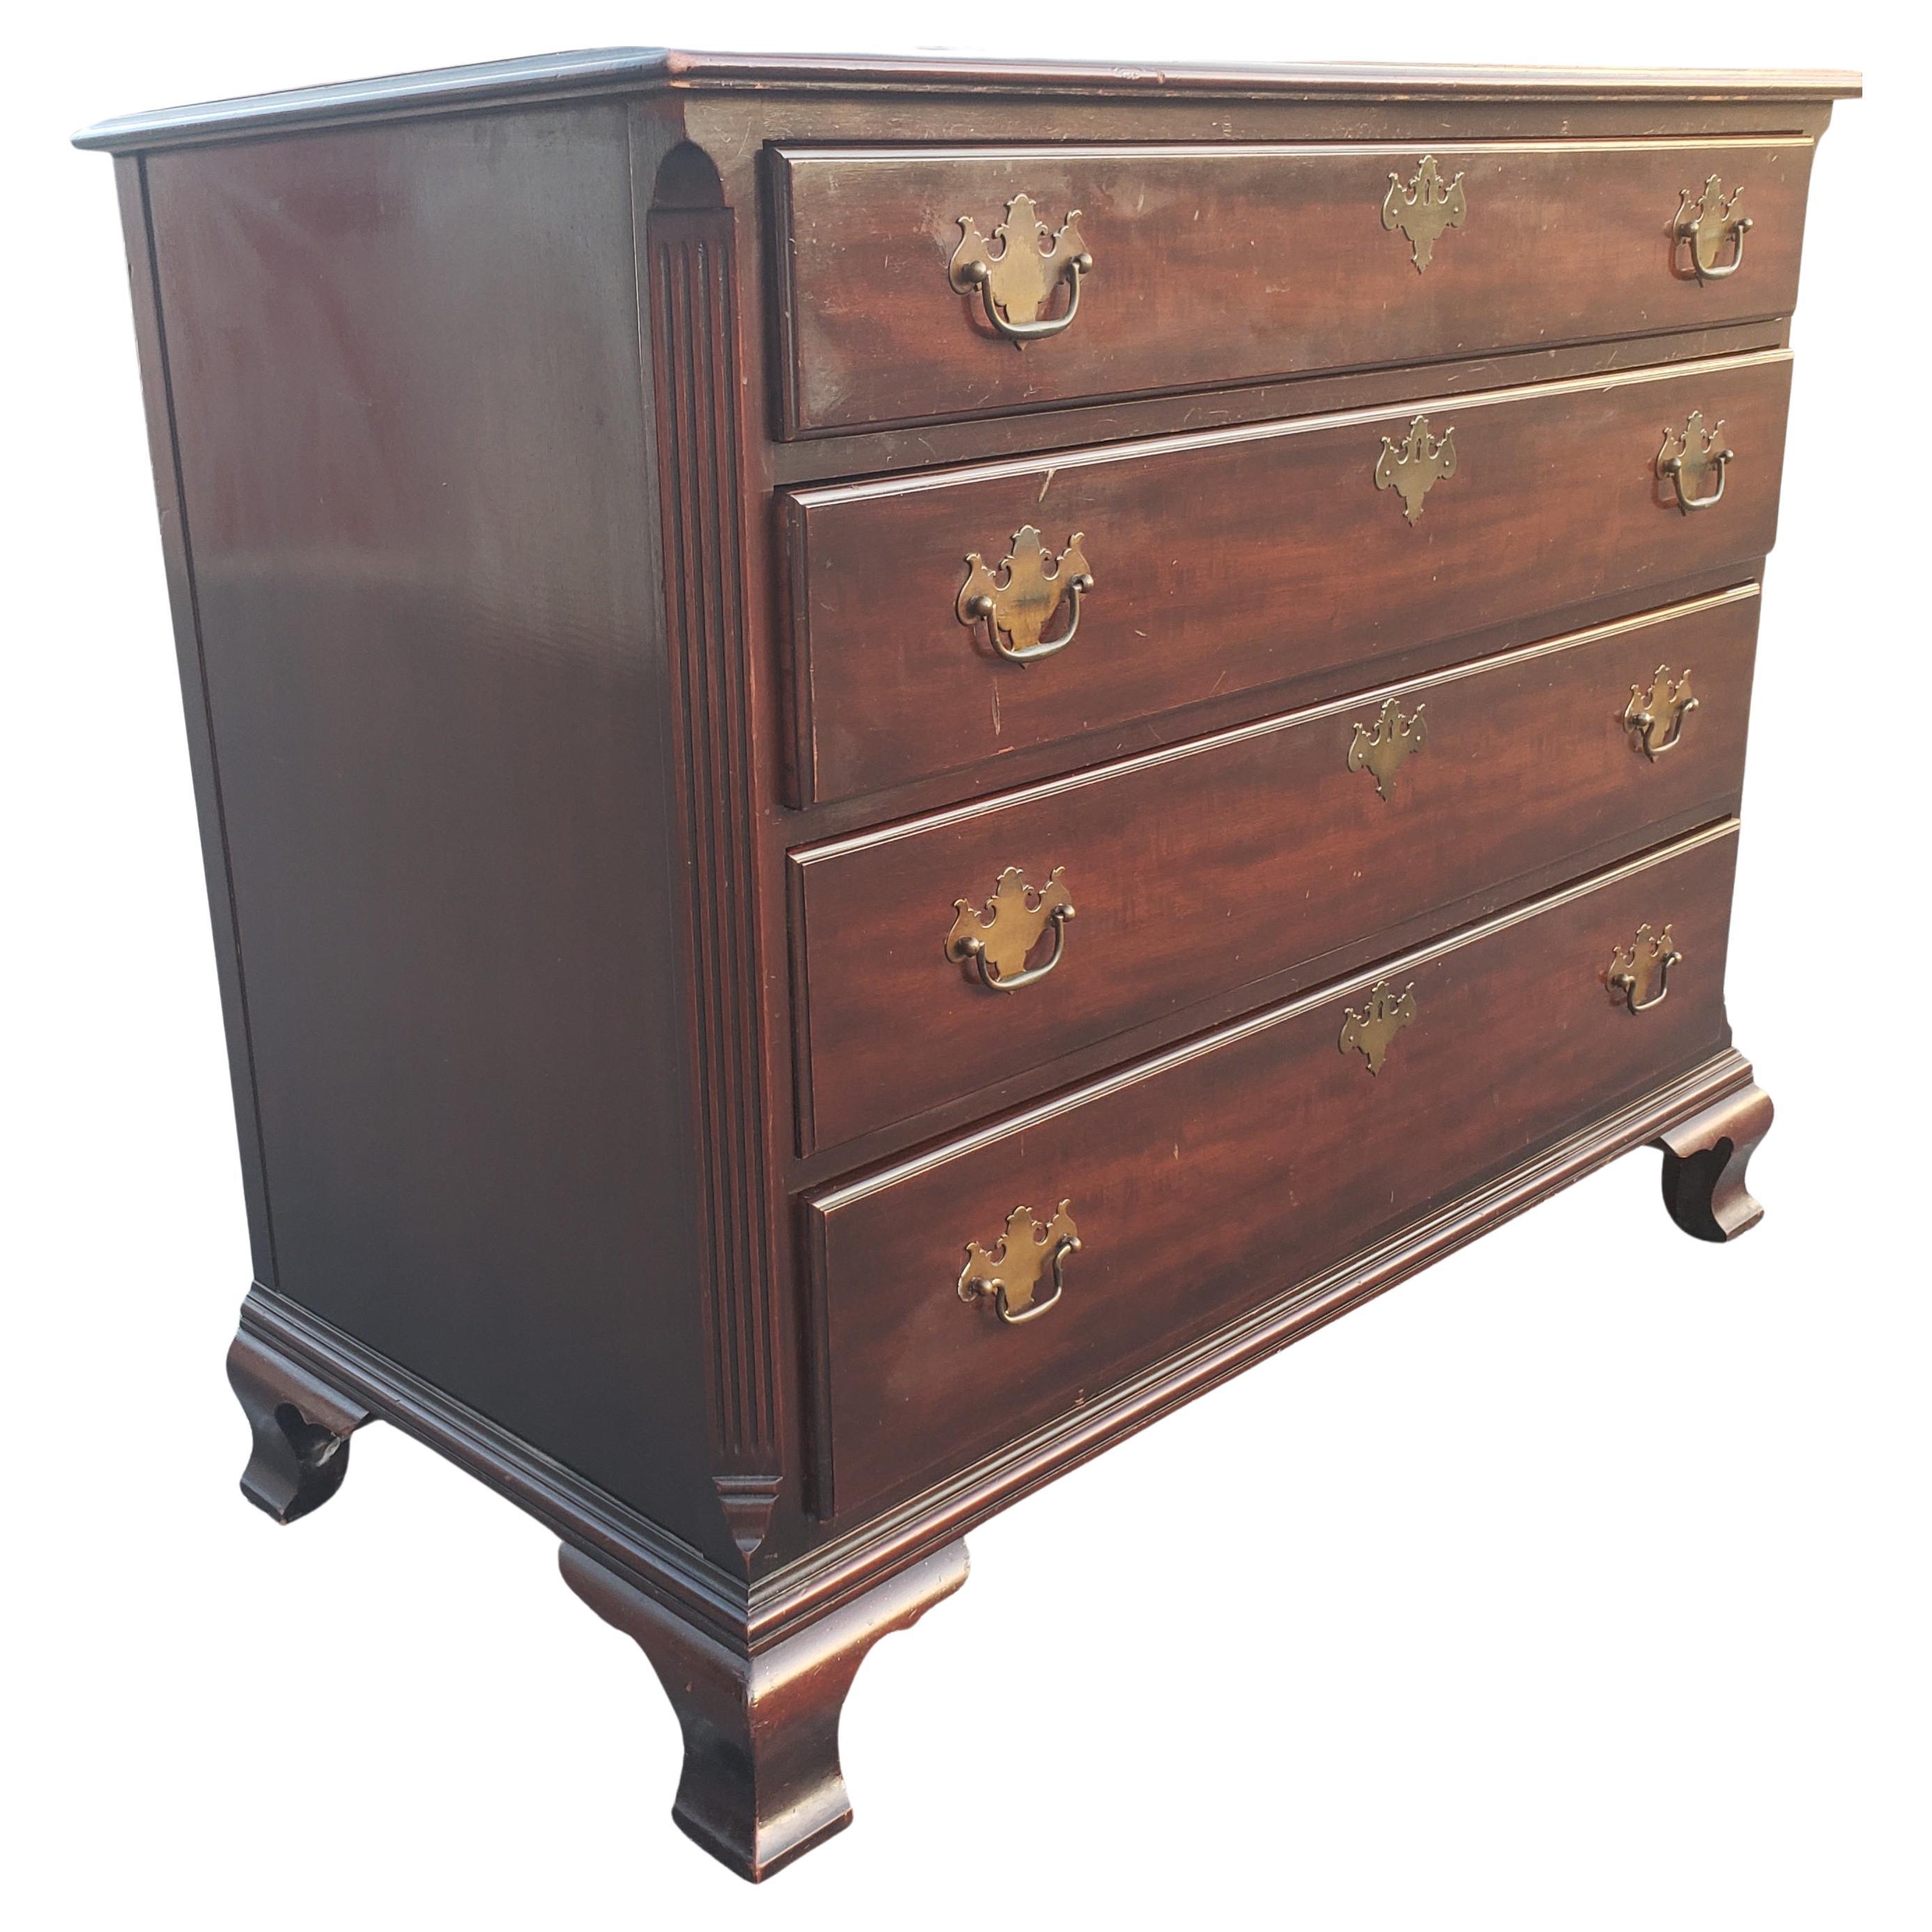 Beautiful Kindel furniture Chest of drawers commode in good vintage condition. From the 1950s. 
Measures 45